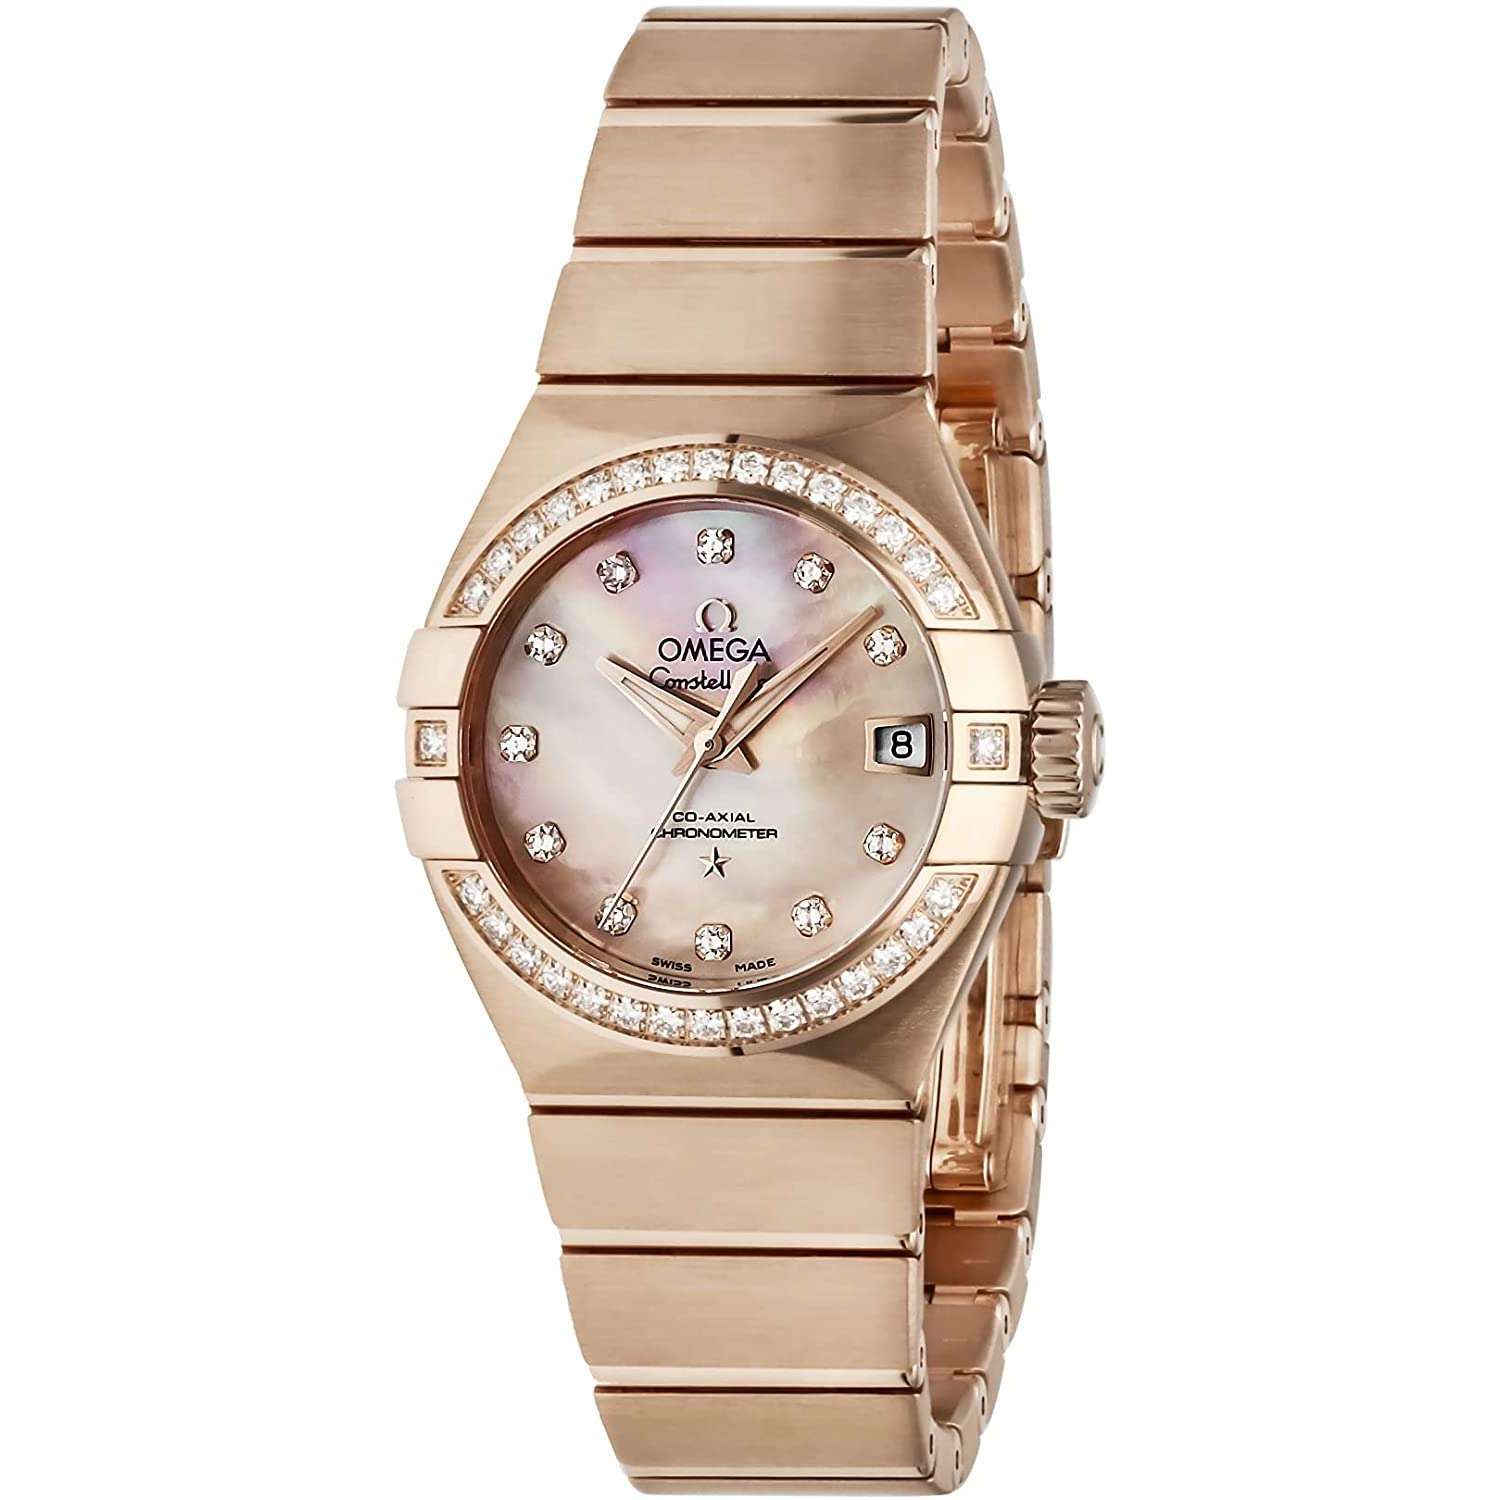 OMEGA CONSTELLATION CO‑AXIAL CHRONOMETER 27 MM WOMEN WATCH 123.55.27.20.57.001 - ROOK JAPAN